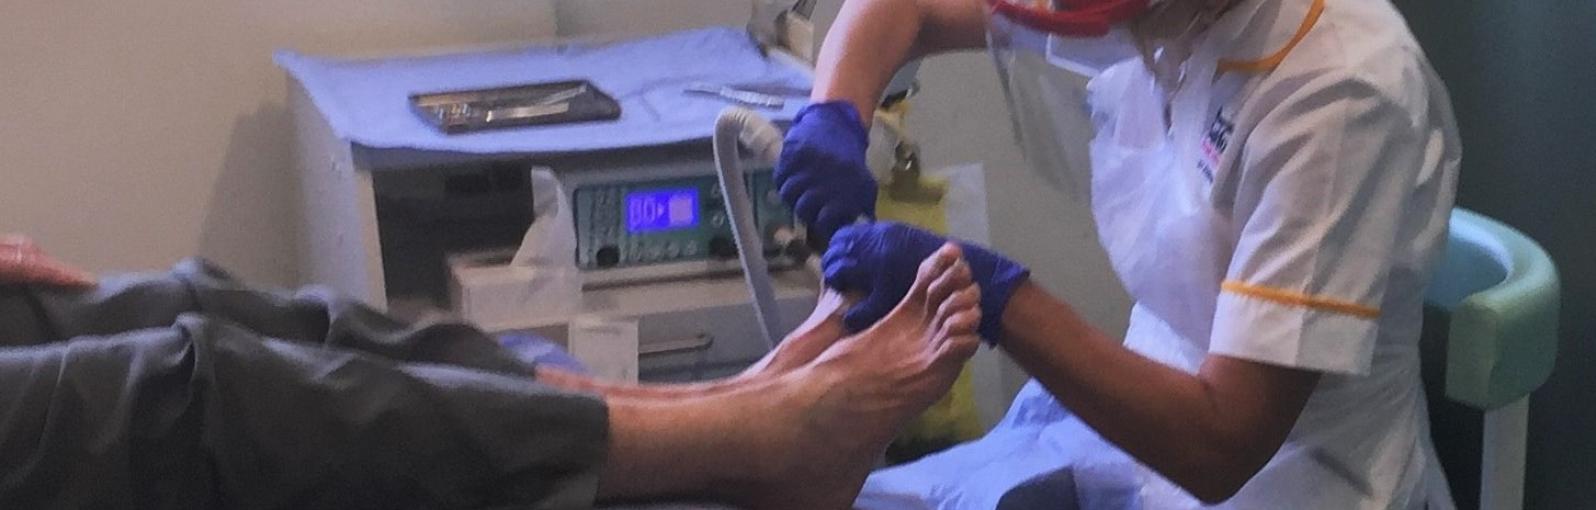 Podiatry clinic reopens after lockdown